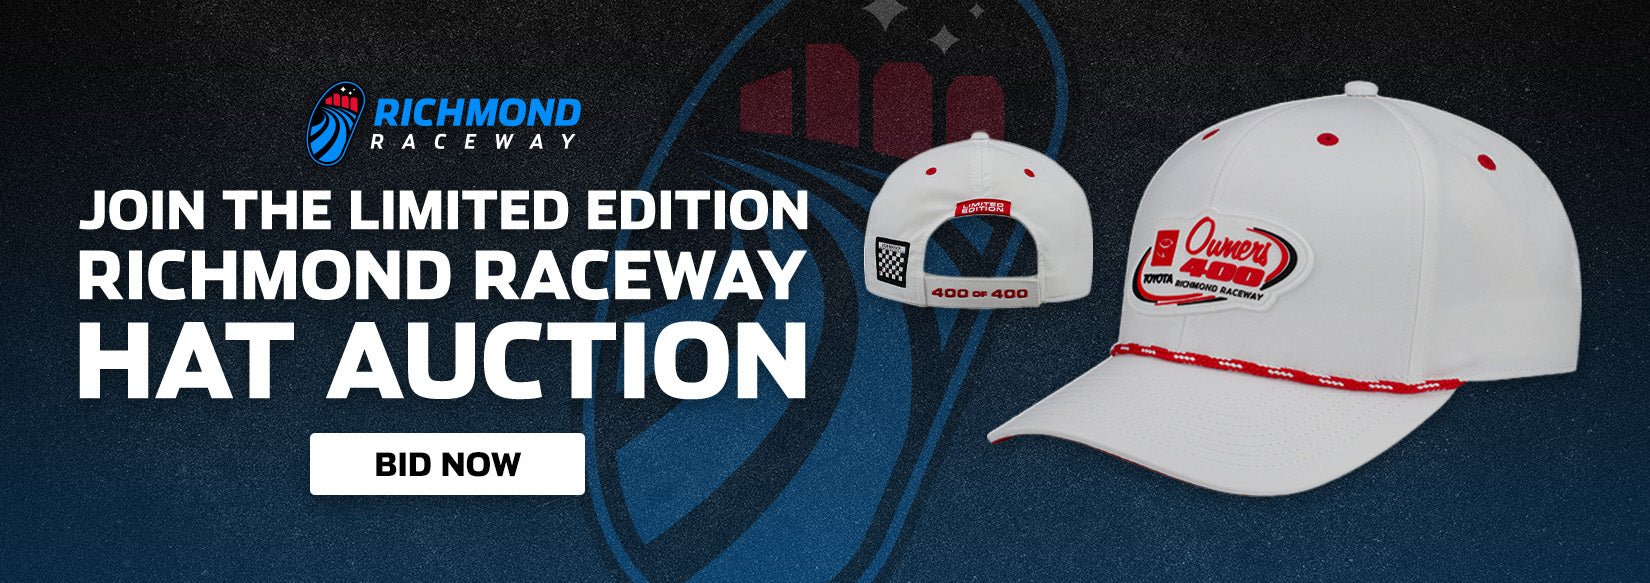 Join the Limited Edition Richmond Raceway Hat Auction - Bid Now